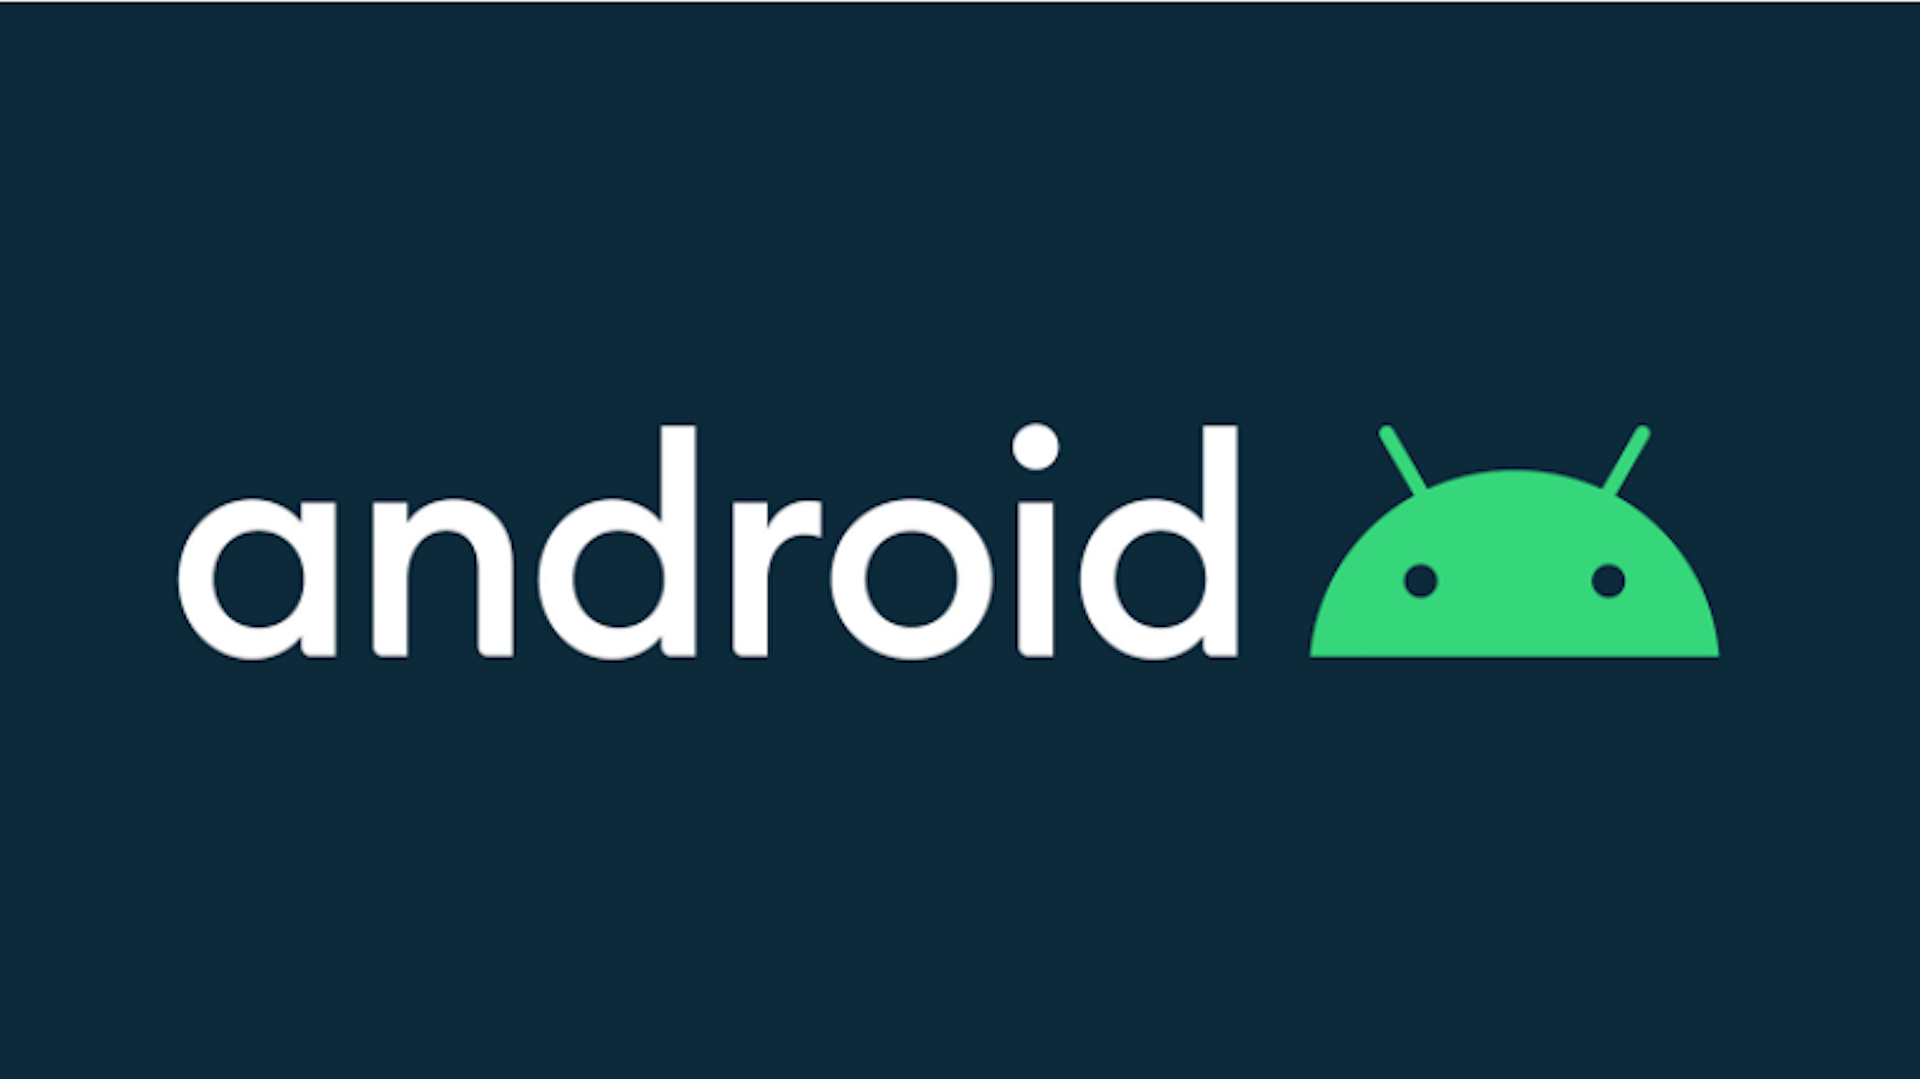 Nye Android heter Android 10